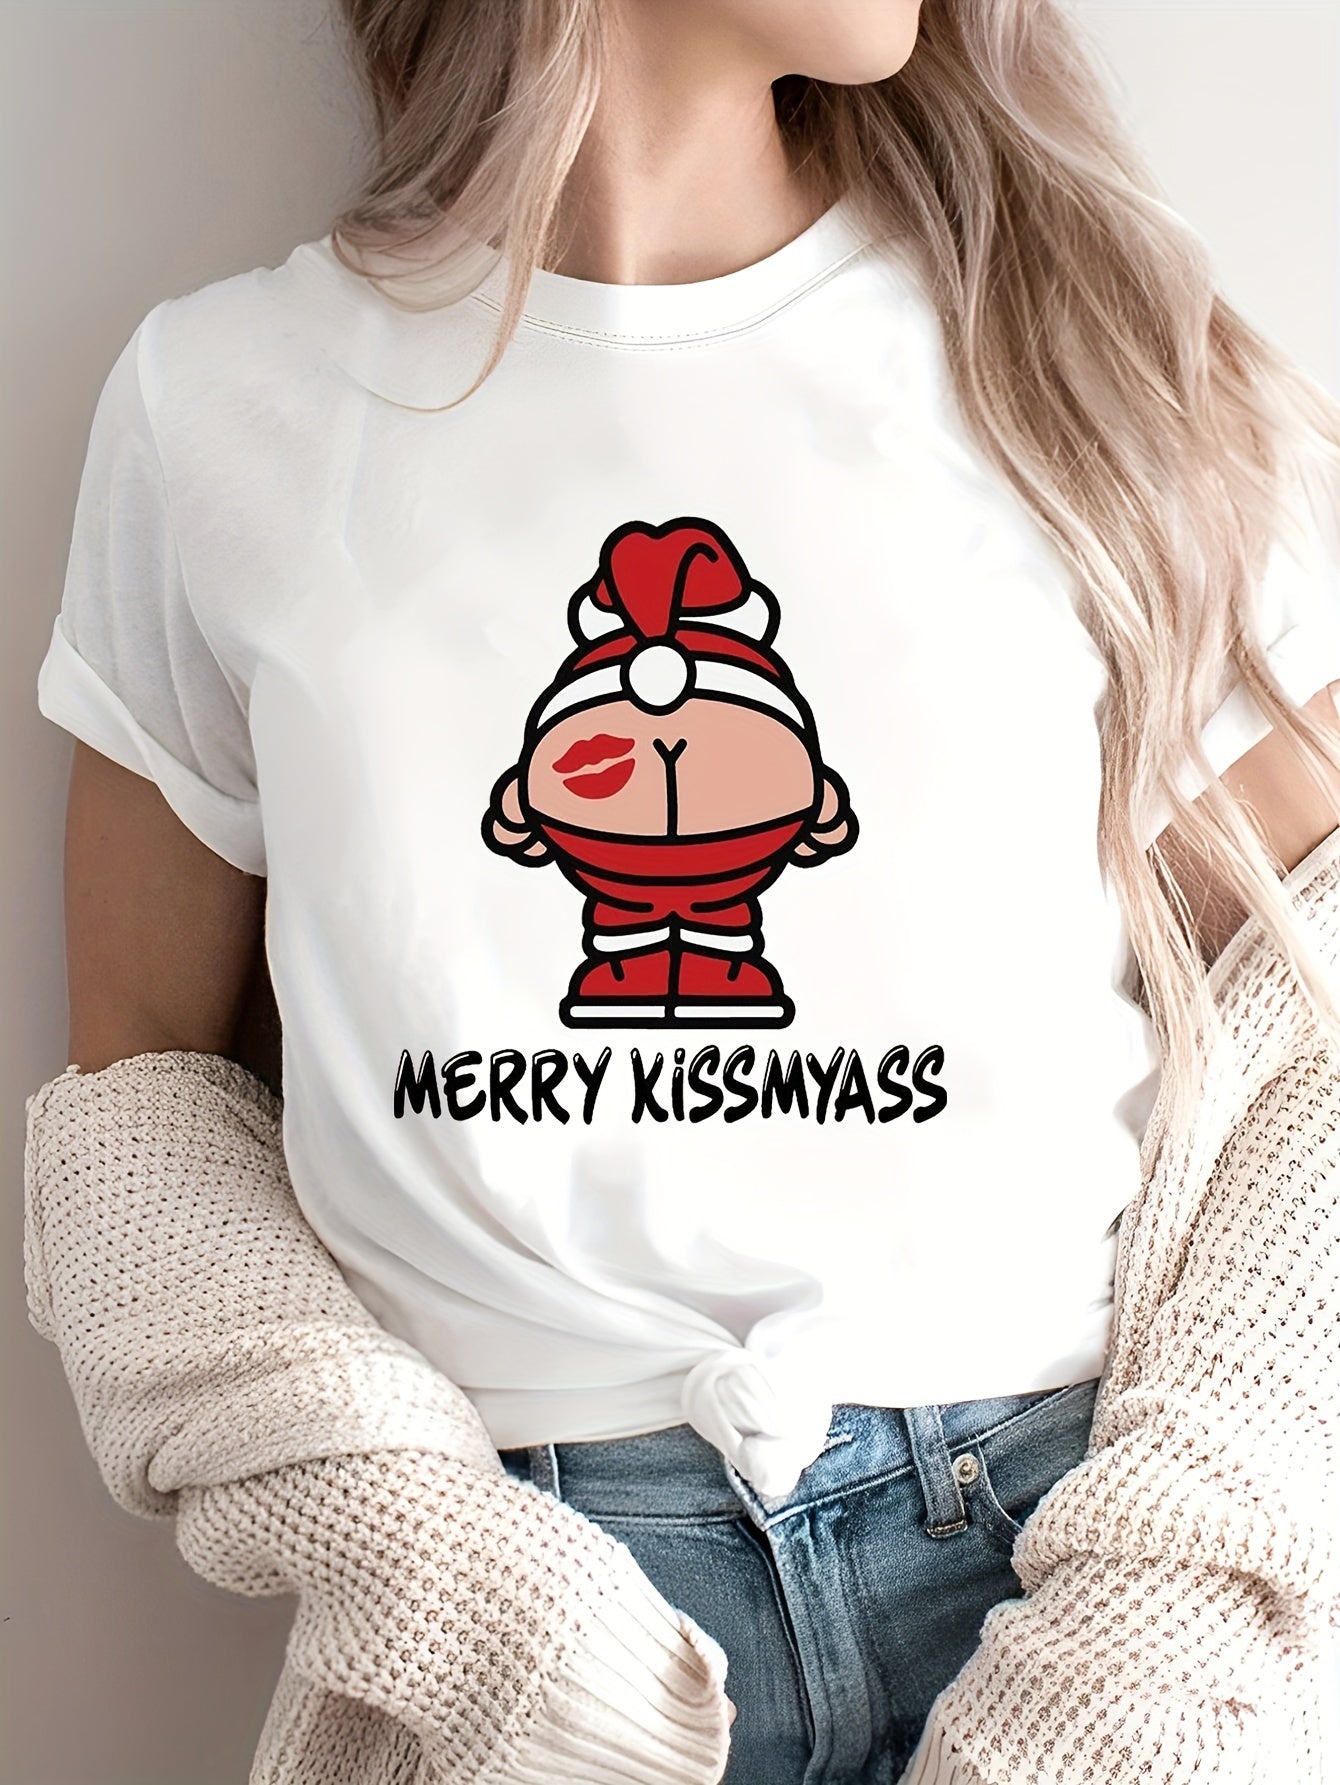 Christmas Graphic Print Tee, Casual Short Sleeve Crew Neck T-shirt, Women's Clothing